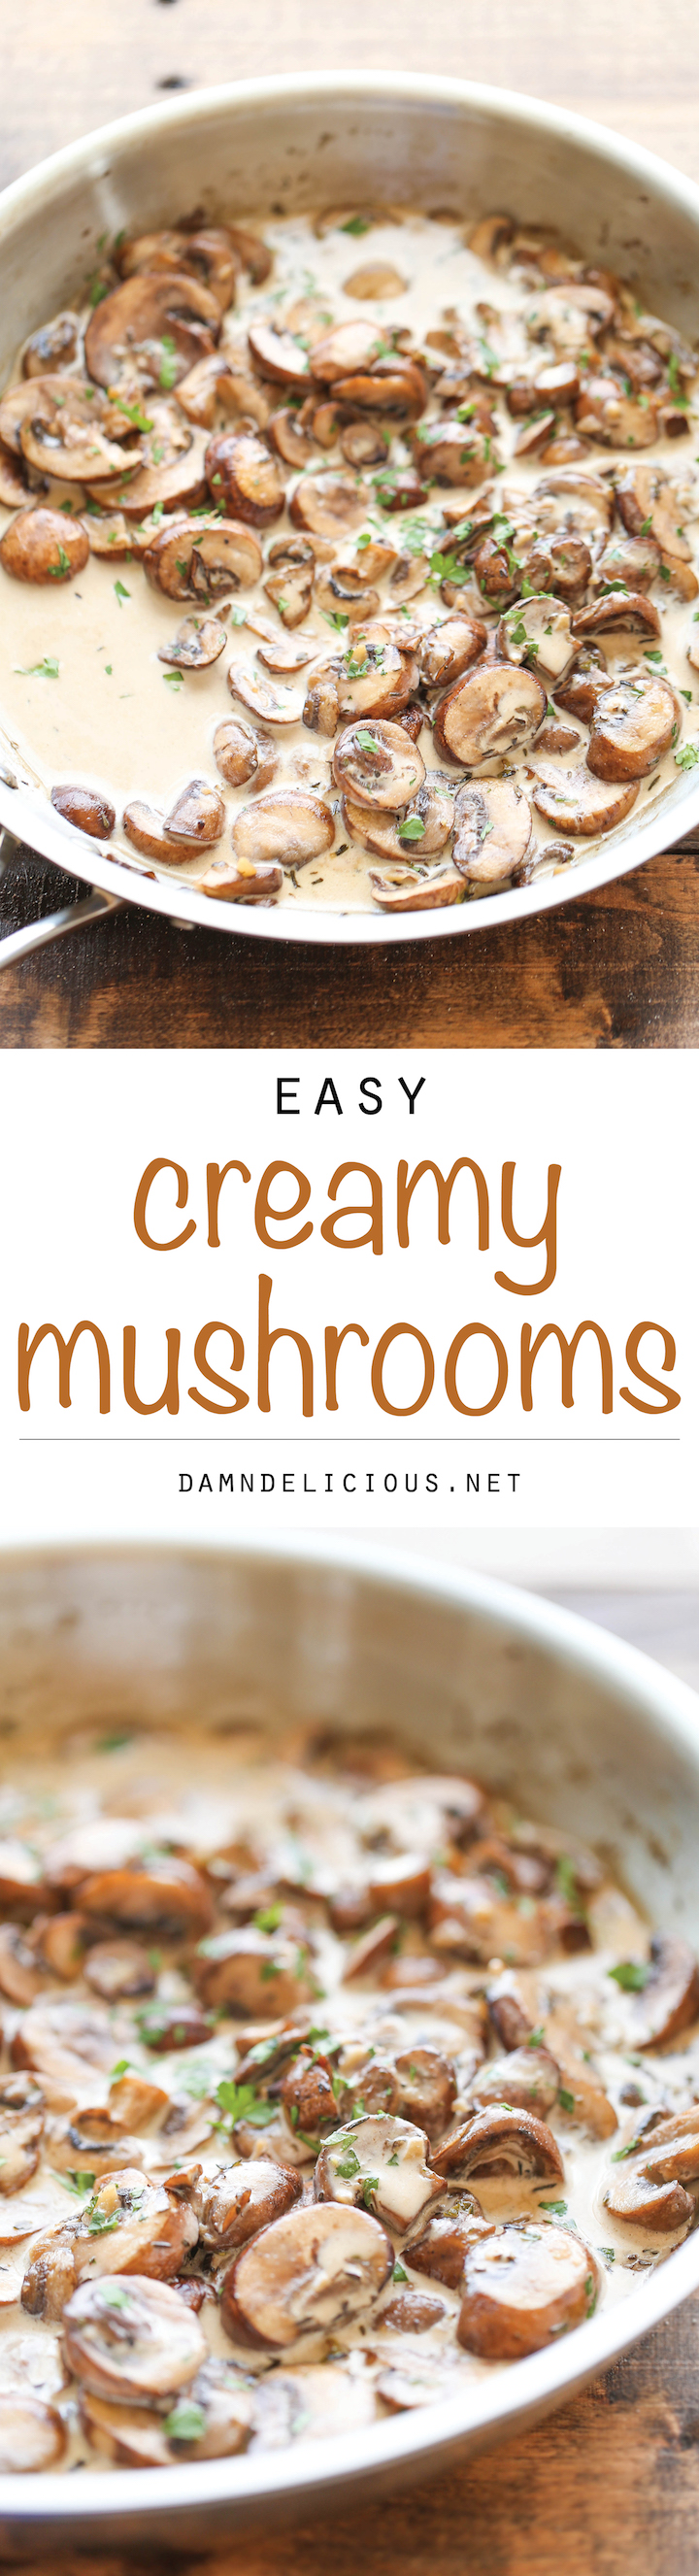 Easy Creamy Mushrooms - The easiest, creamiest mushrooms you will ever have - it's so good, you'll want to skip the main dish and make this a meal instead!